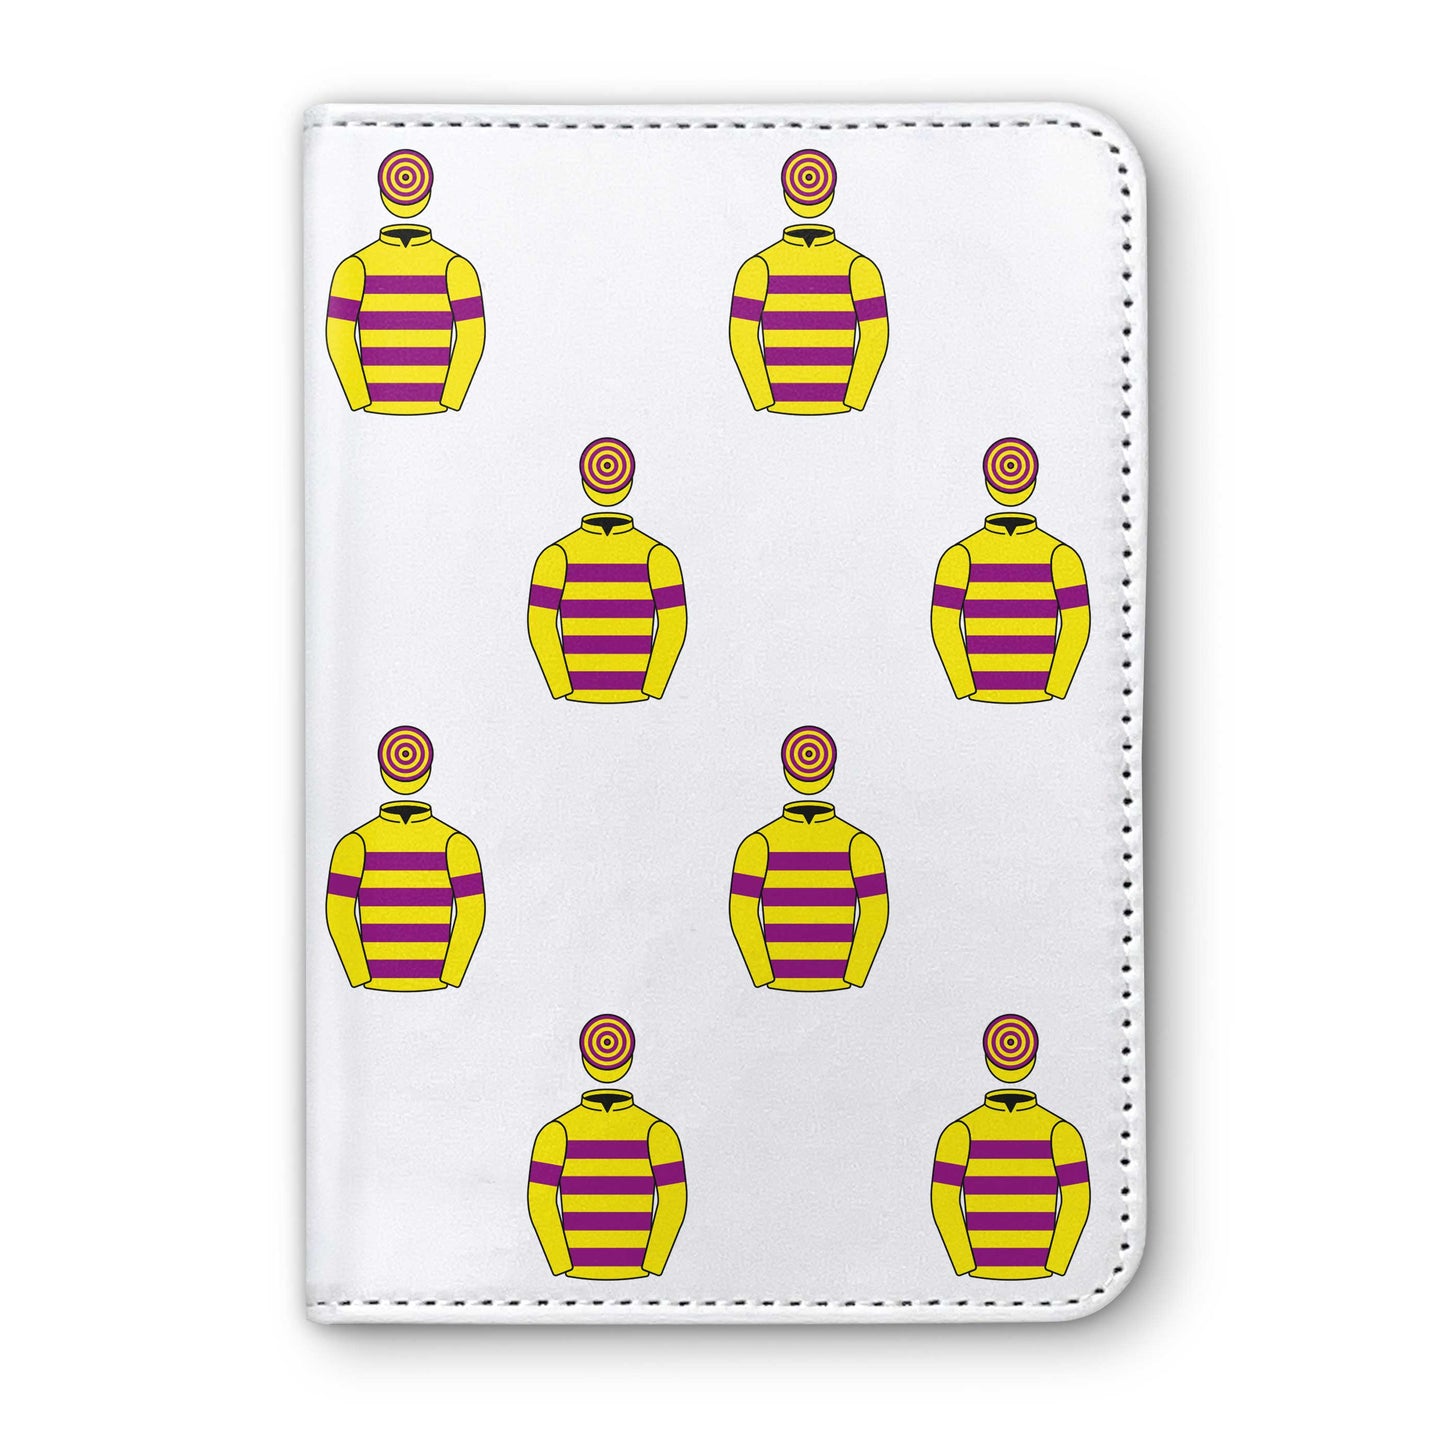 Mr And Mrs J D Cotton Horse Racing Passport Holder - Hacked Up Horse Racing Gifts